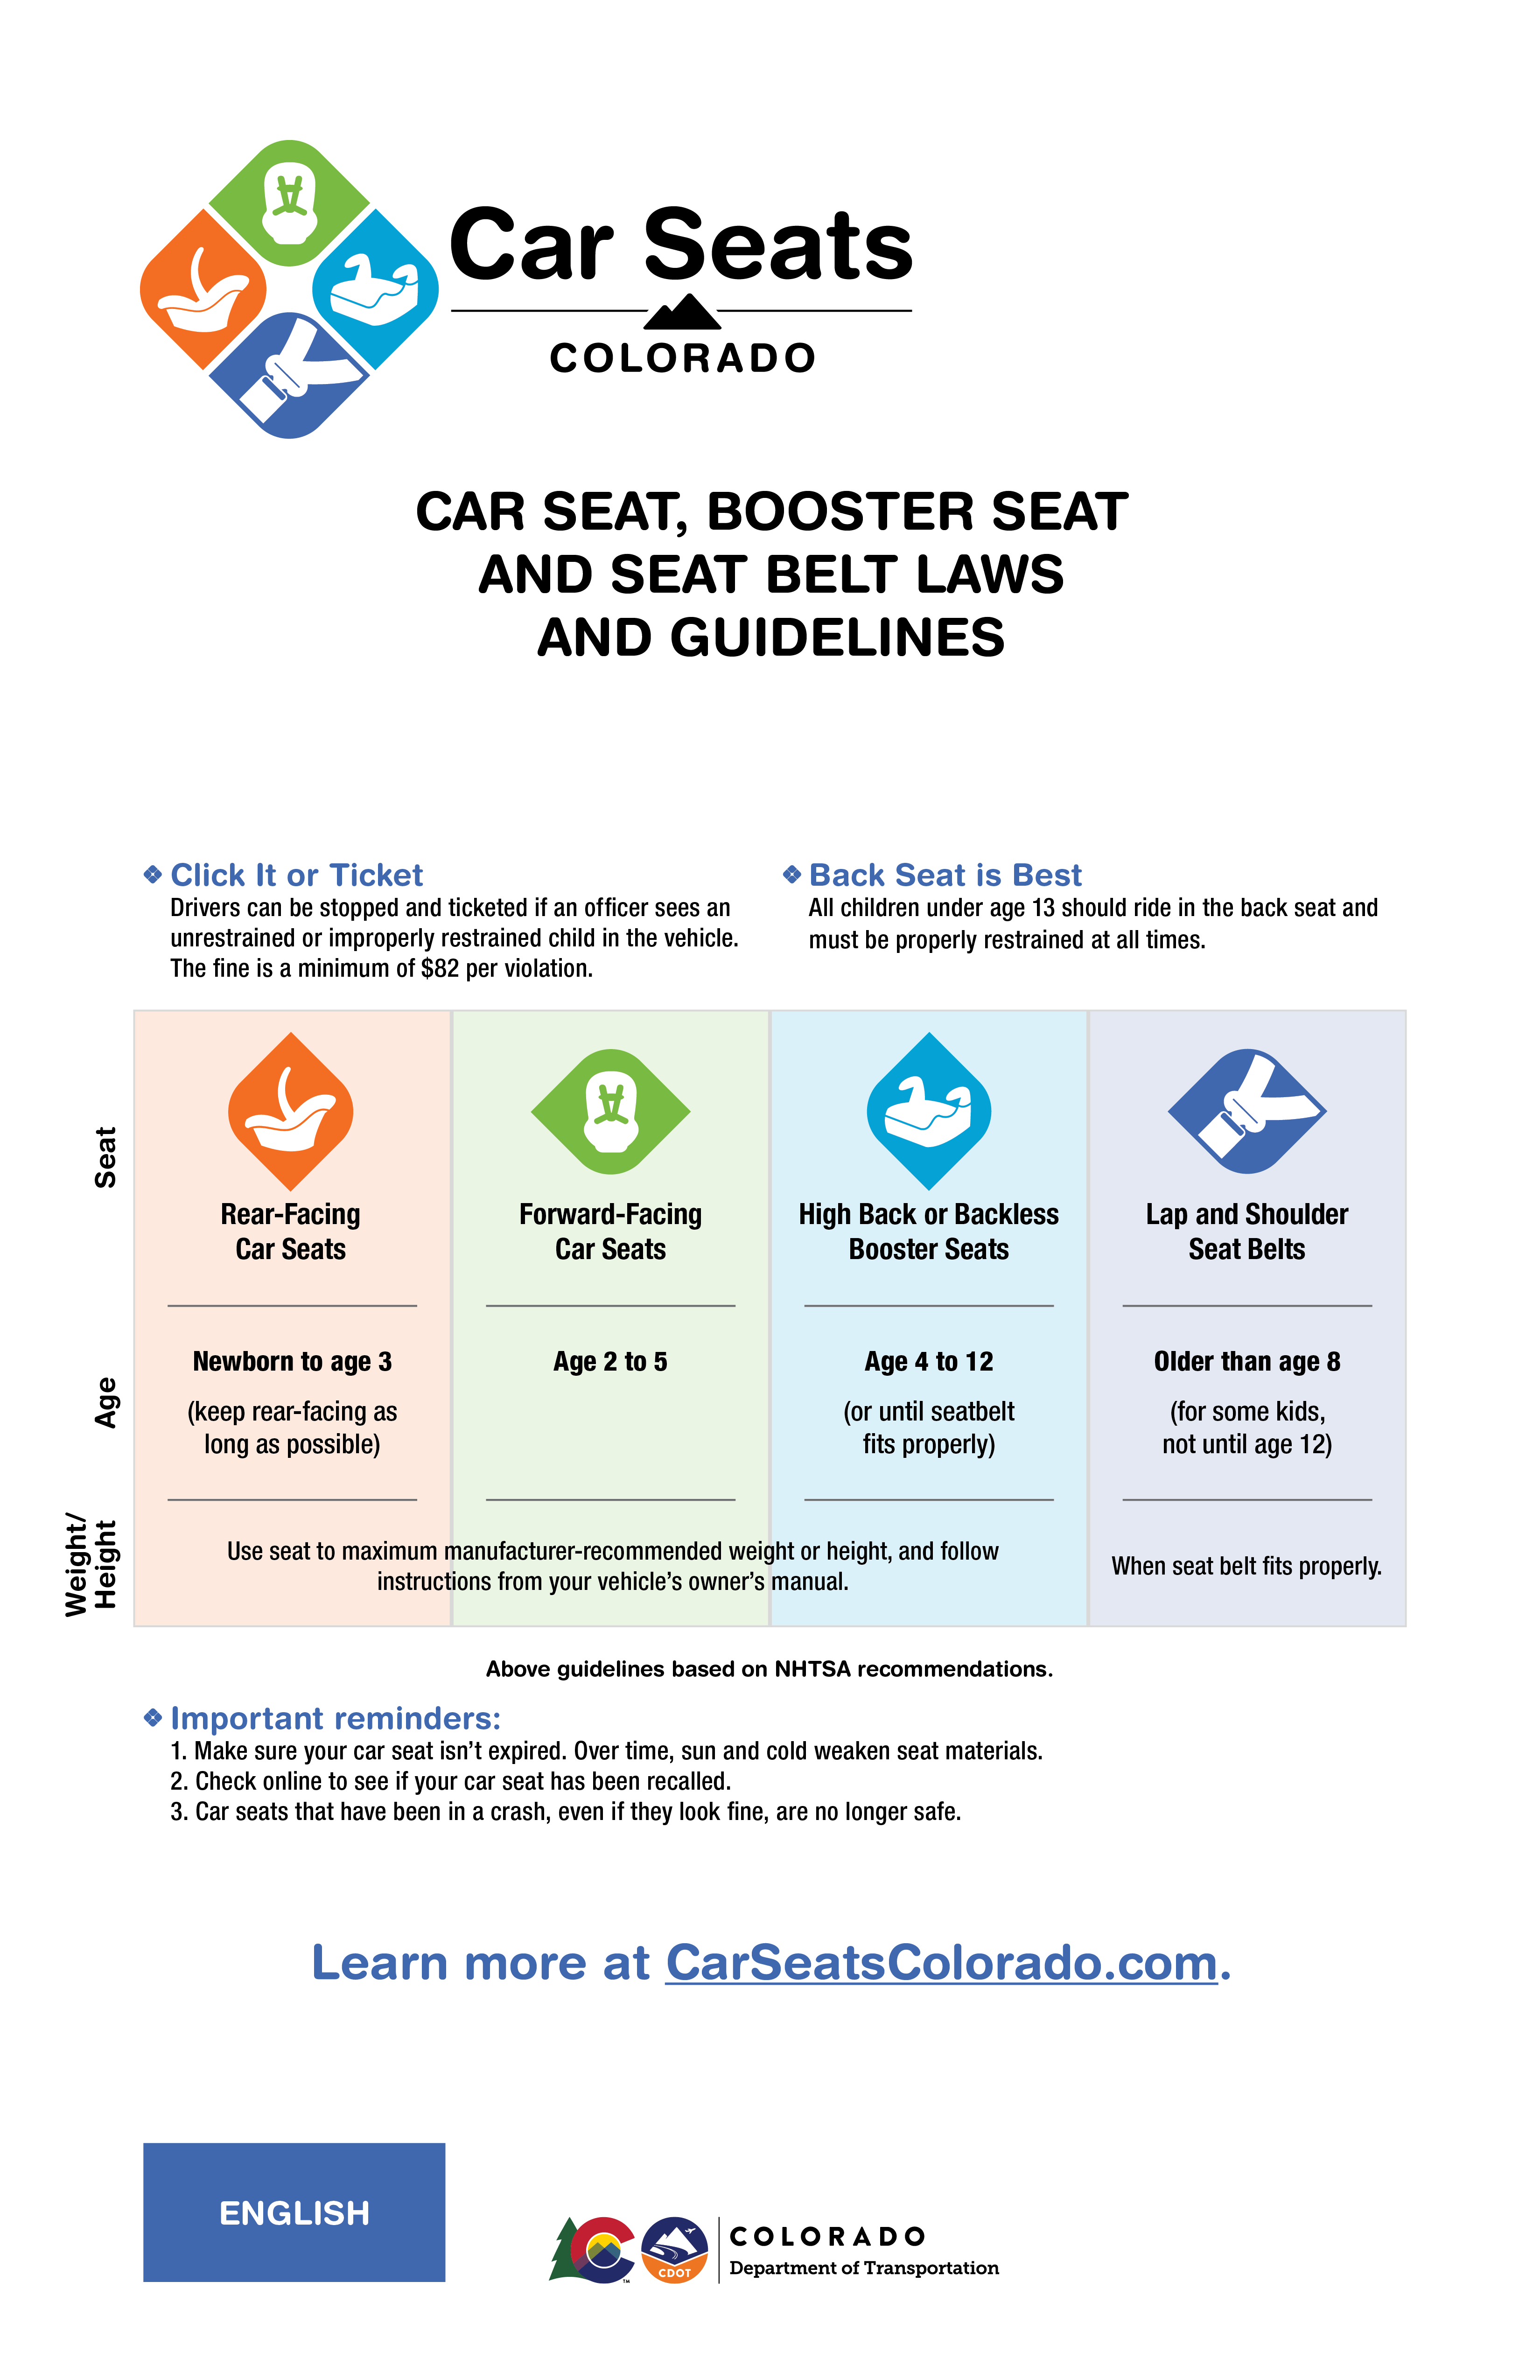 Car Seat, Booster Seat and Seat Belt Laws & Guidelines Poster - English detail image